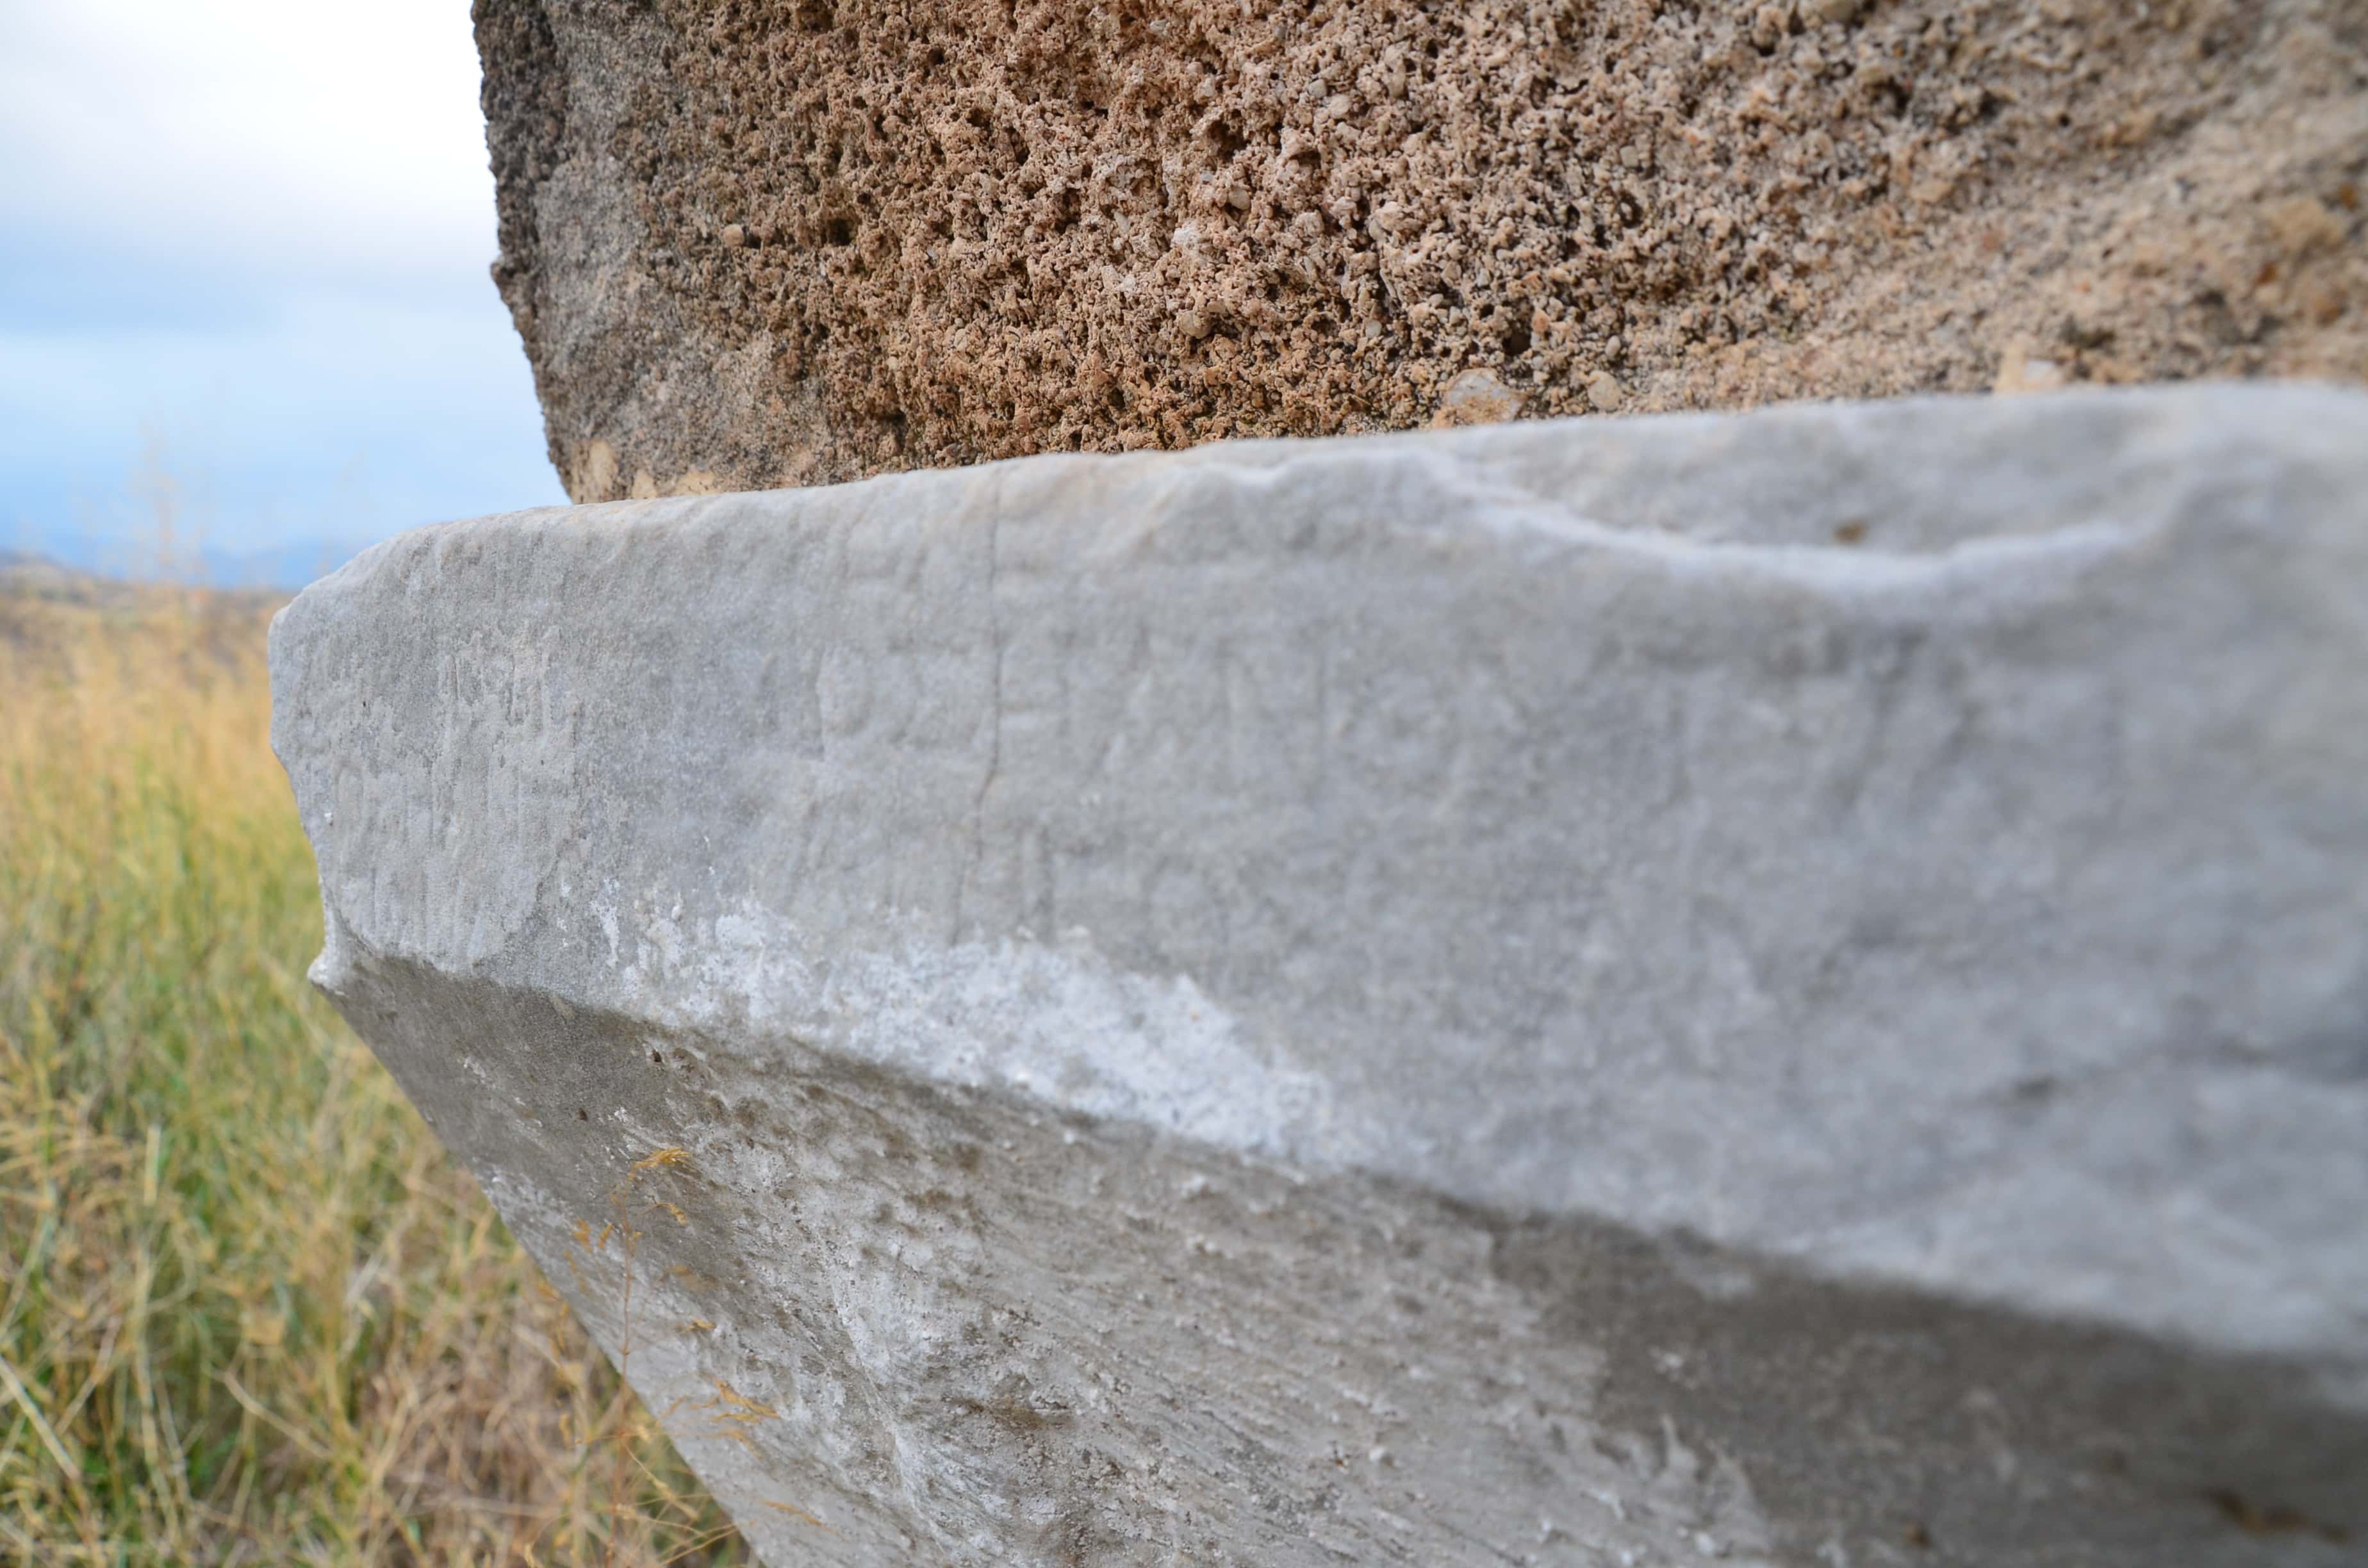 Inscription in Greek on the ruined church